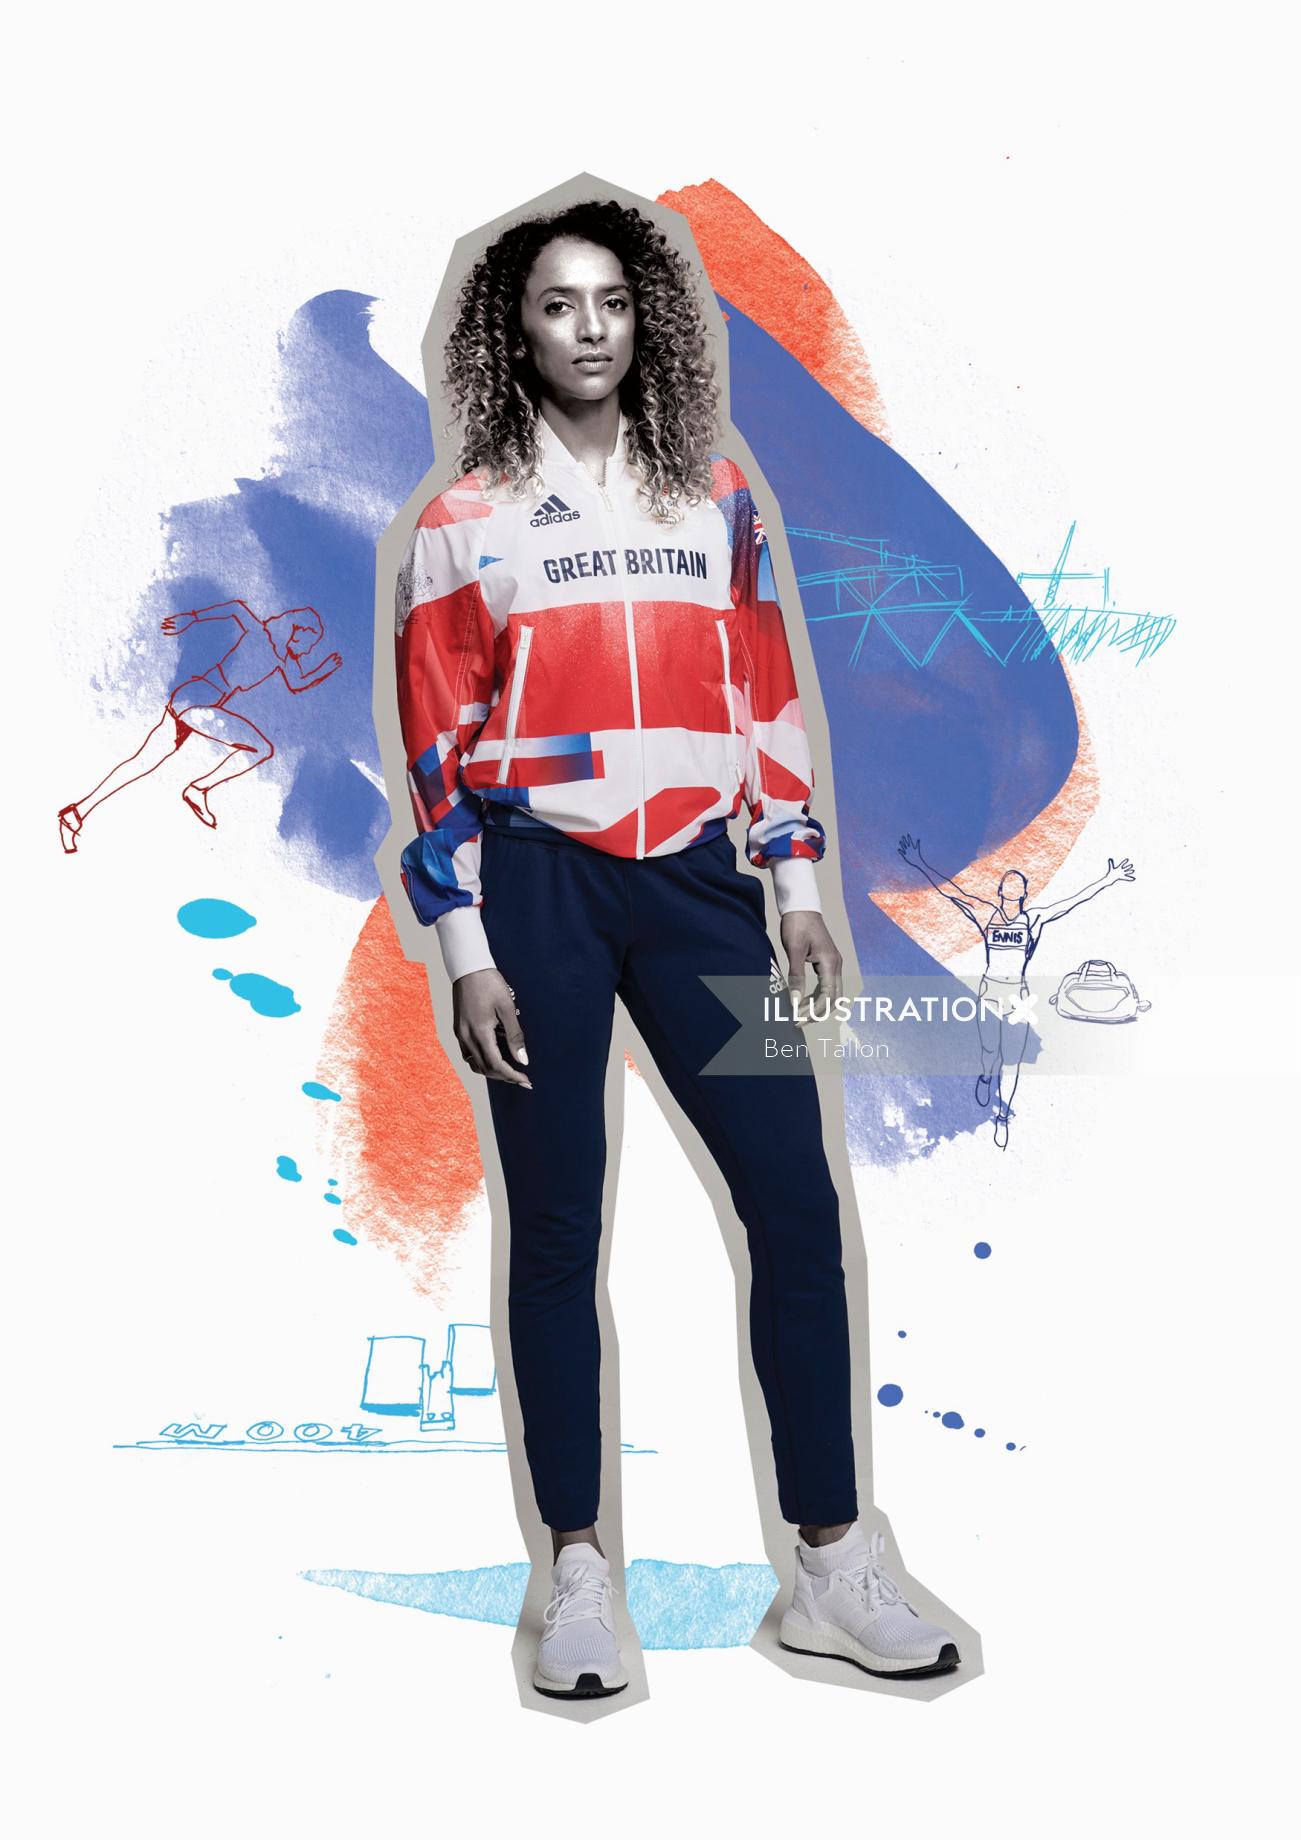 The Evening Standard illustrates British Olympic hopefuls in 2020. Laviai Nielson